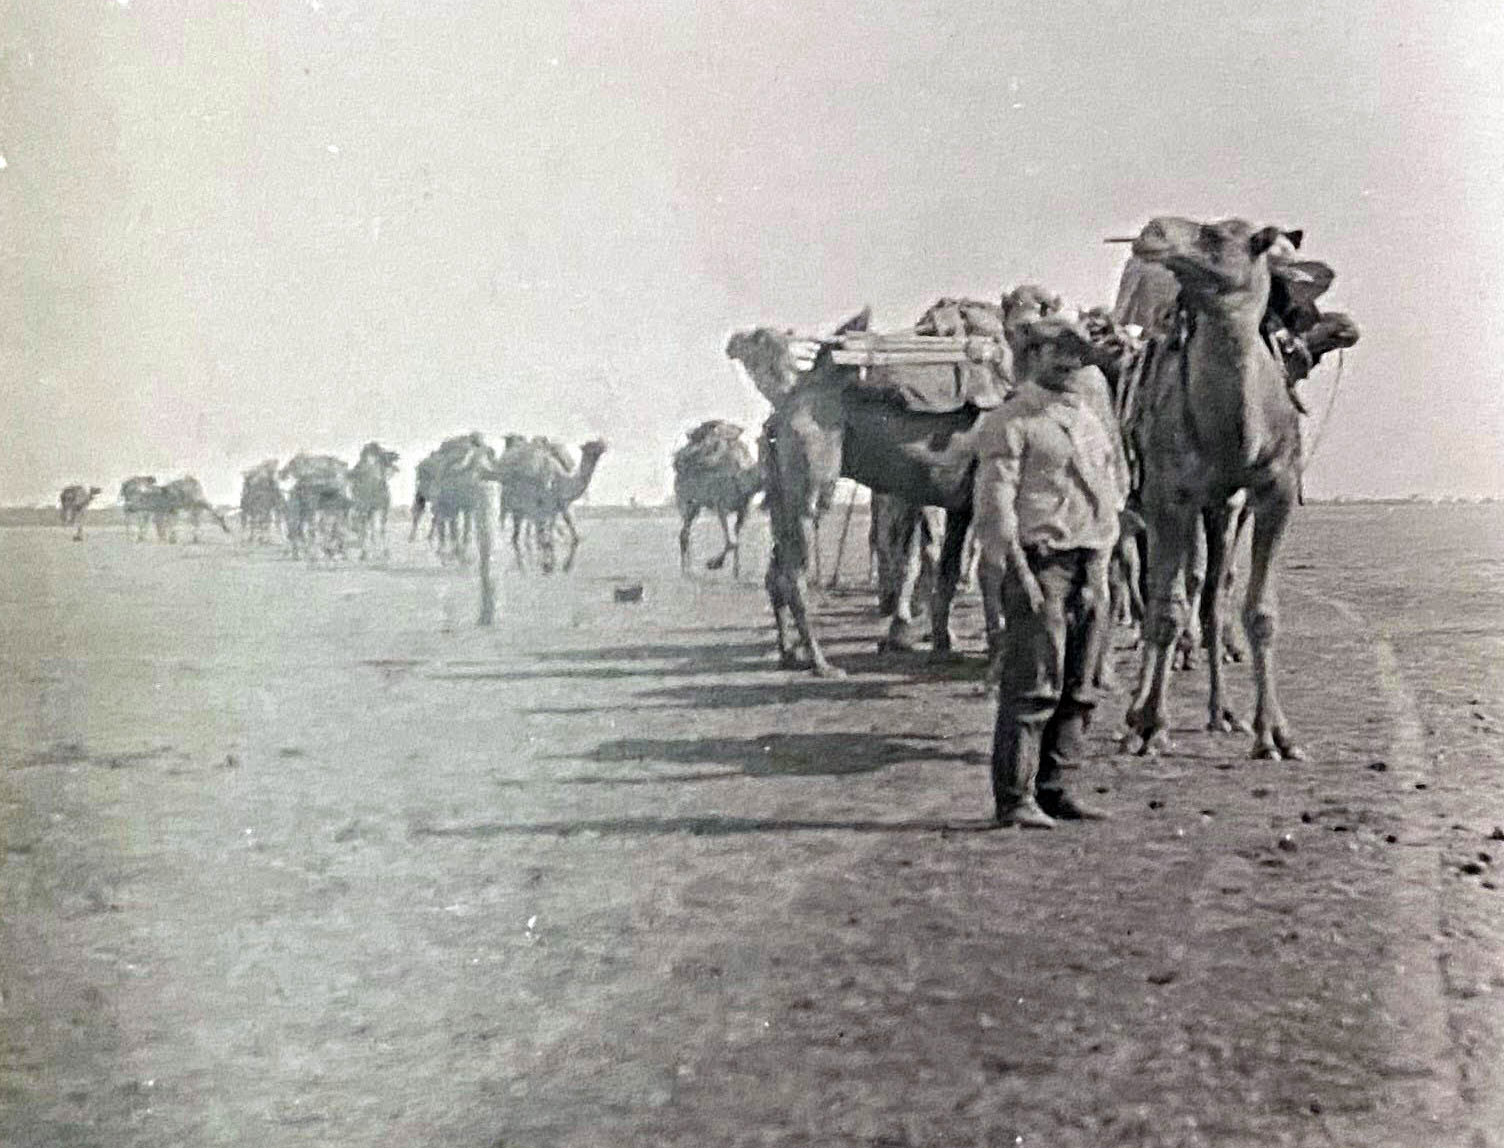 Camel team passing through Headingly Station, Queensland, undated (160-337).